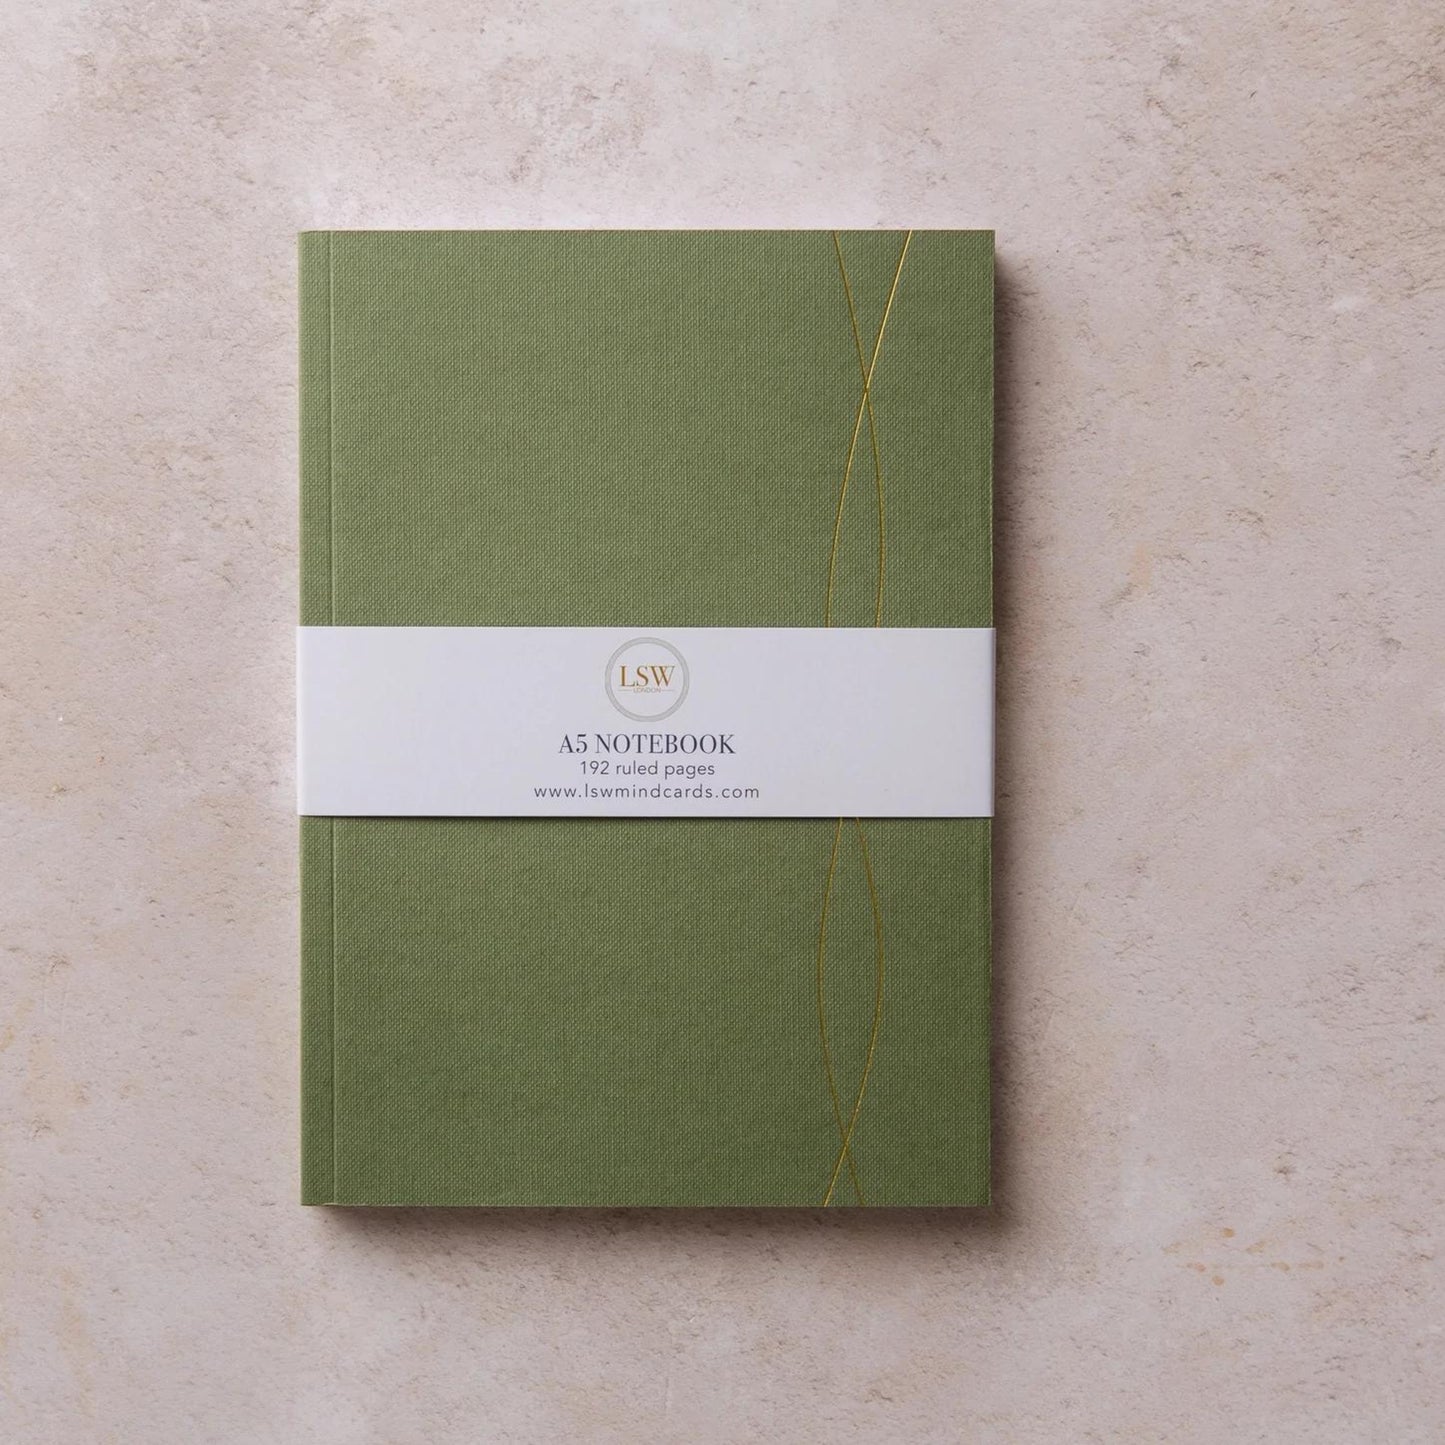 A5 Notebook by LSW London in Mid Green